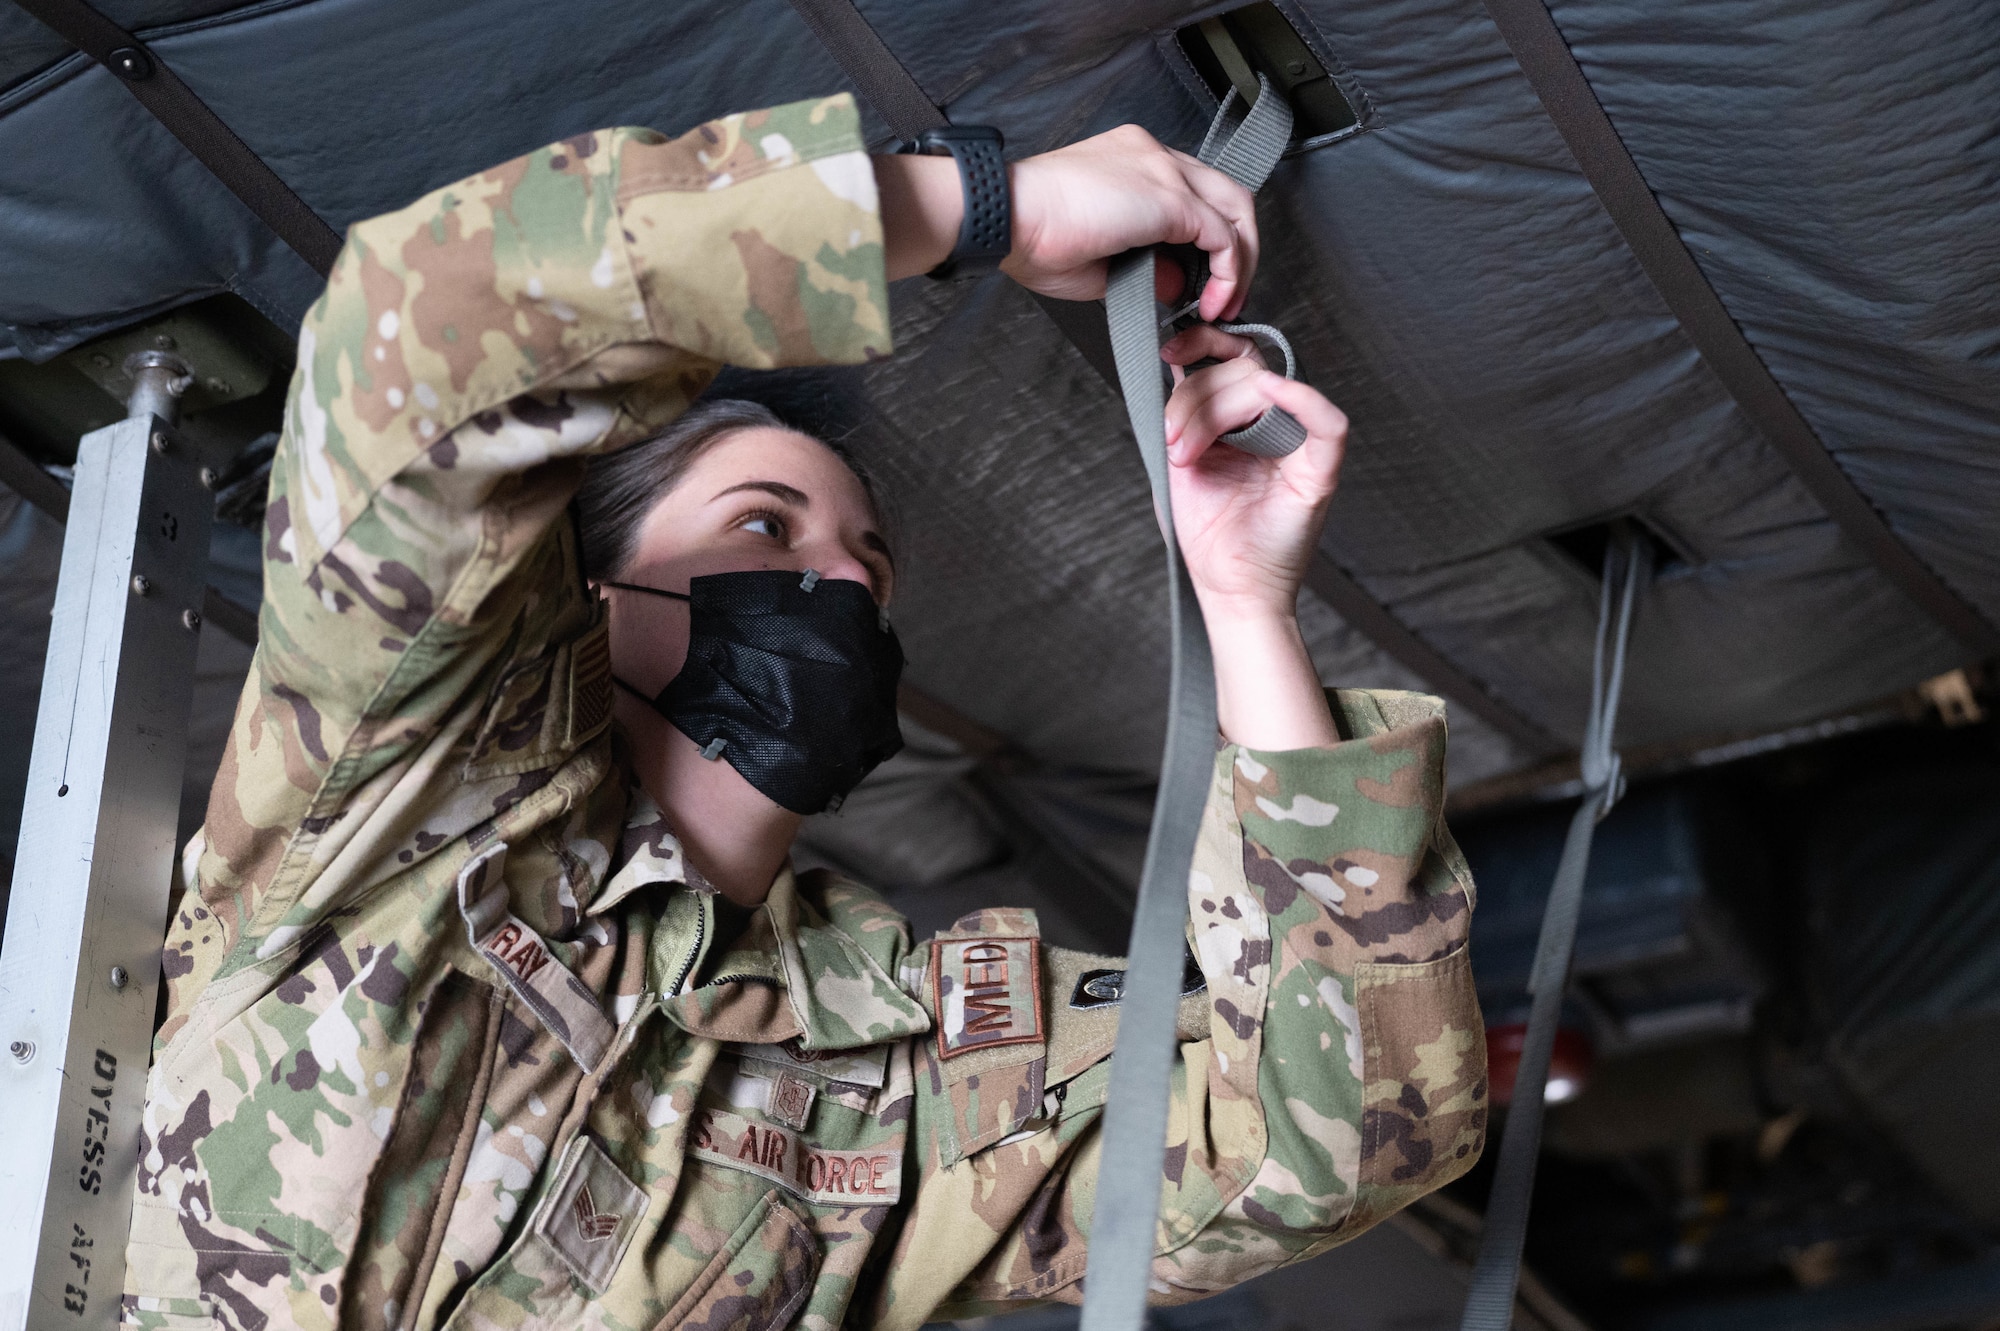 U.S. Air Force Senior Airman Chelsey Ray, 375th Aeromedical Evacuation Squadron aeromedical technician, secures straps during a training exercise on Scott Air Force Base, Illinois, Nov. 3, 2021. Members of the 375th AES interact with loadmasters in real-world scenarios to prepare the aircraft for extraction of patients. (U.S. Air Force photo by Airman 1st Class Stephanie Henry)